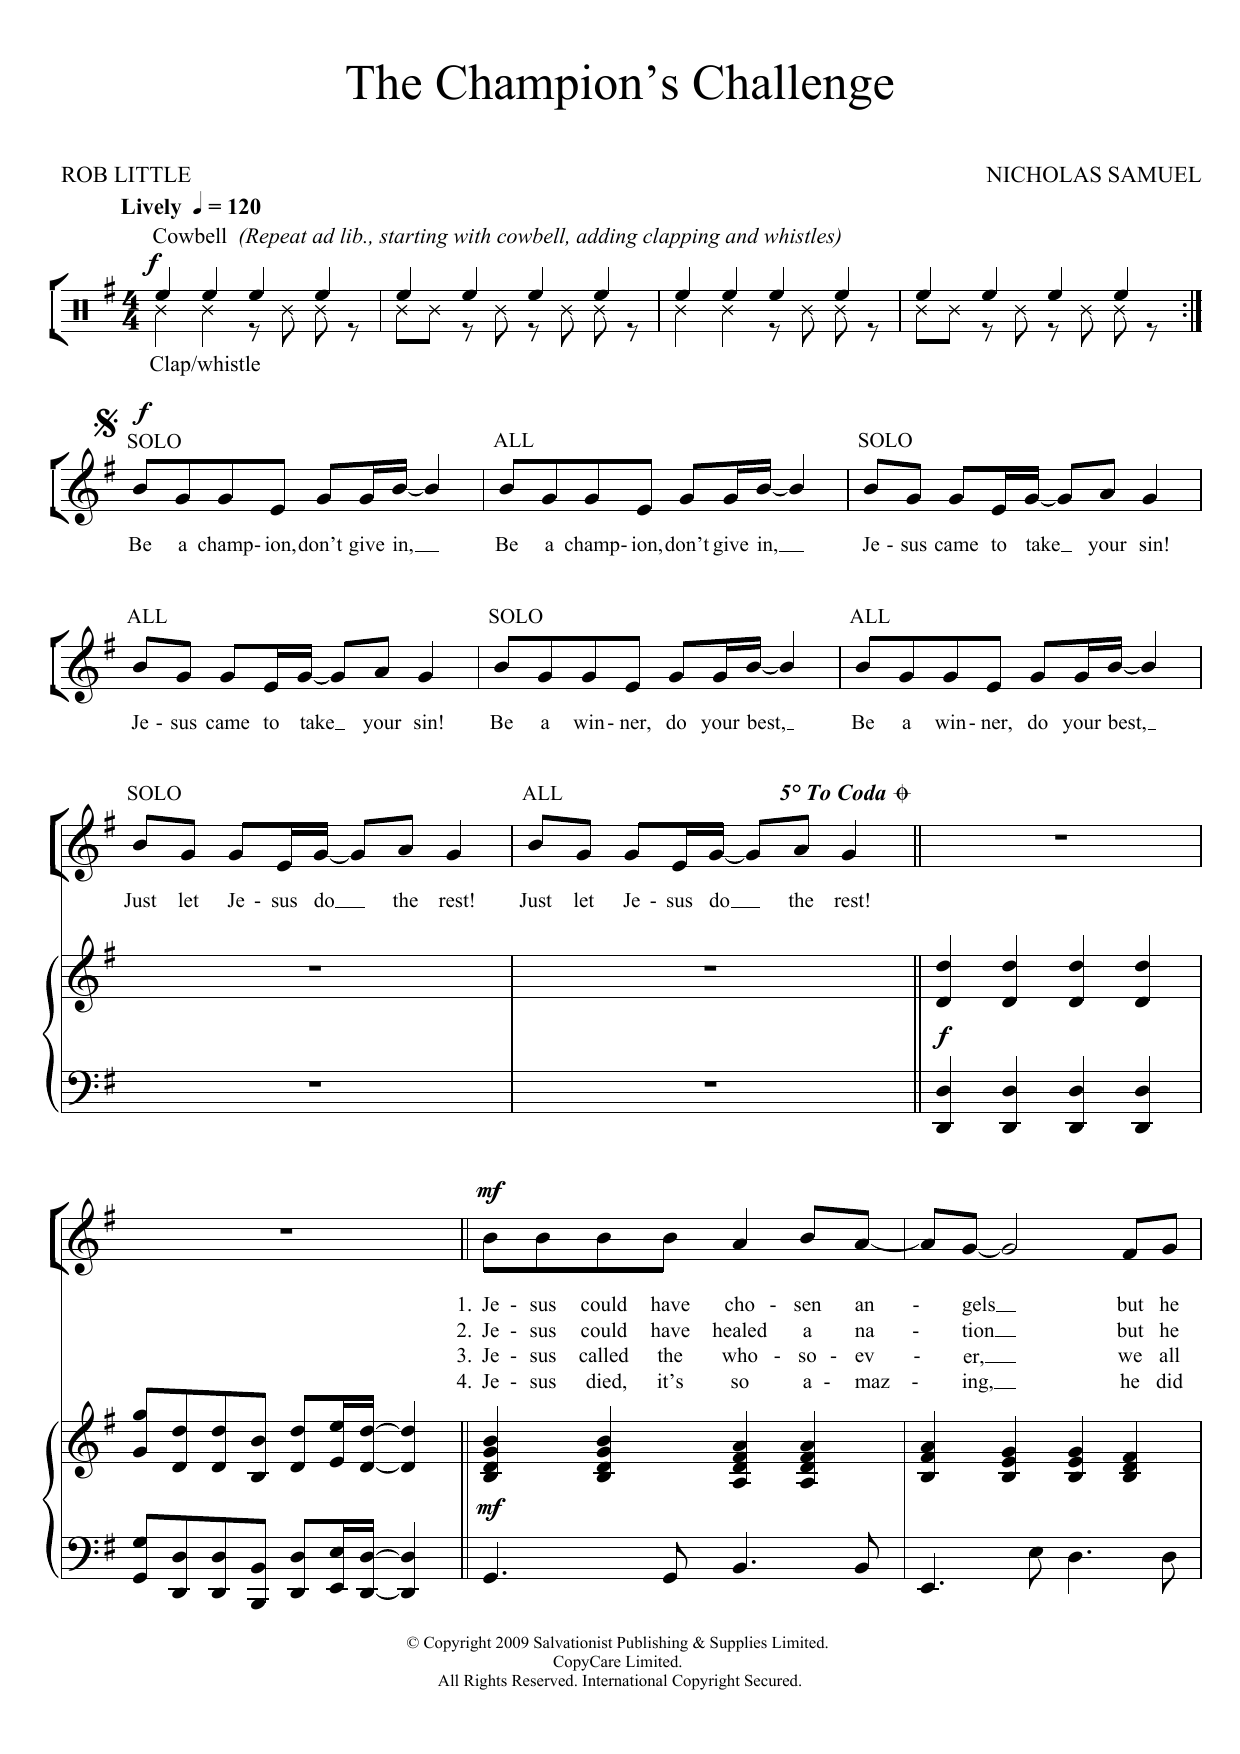 Download The Salvation Army The Champion's Challenge Sheet Music